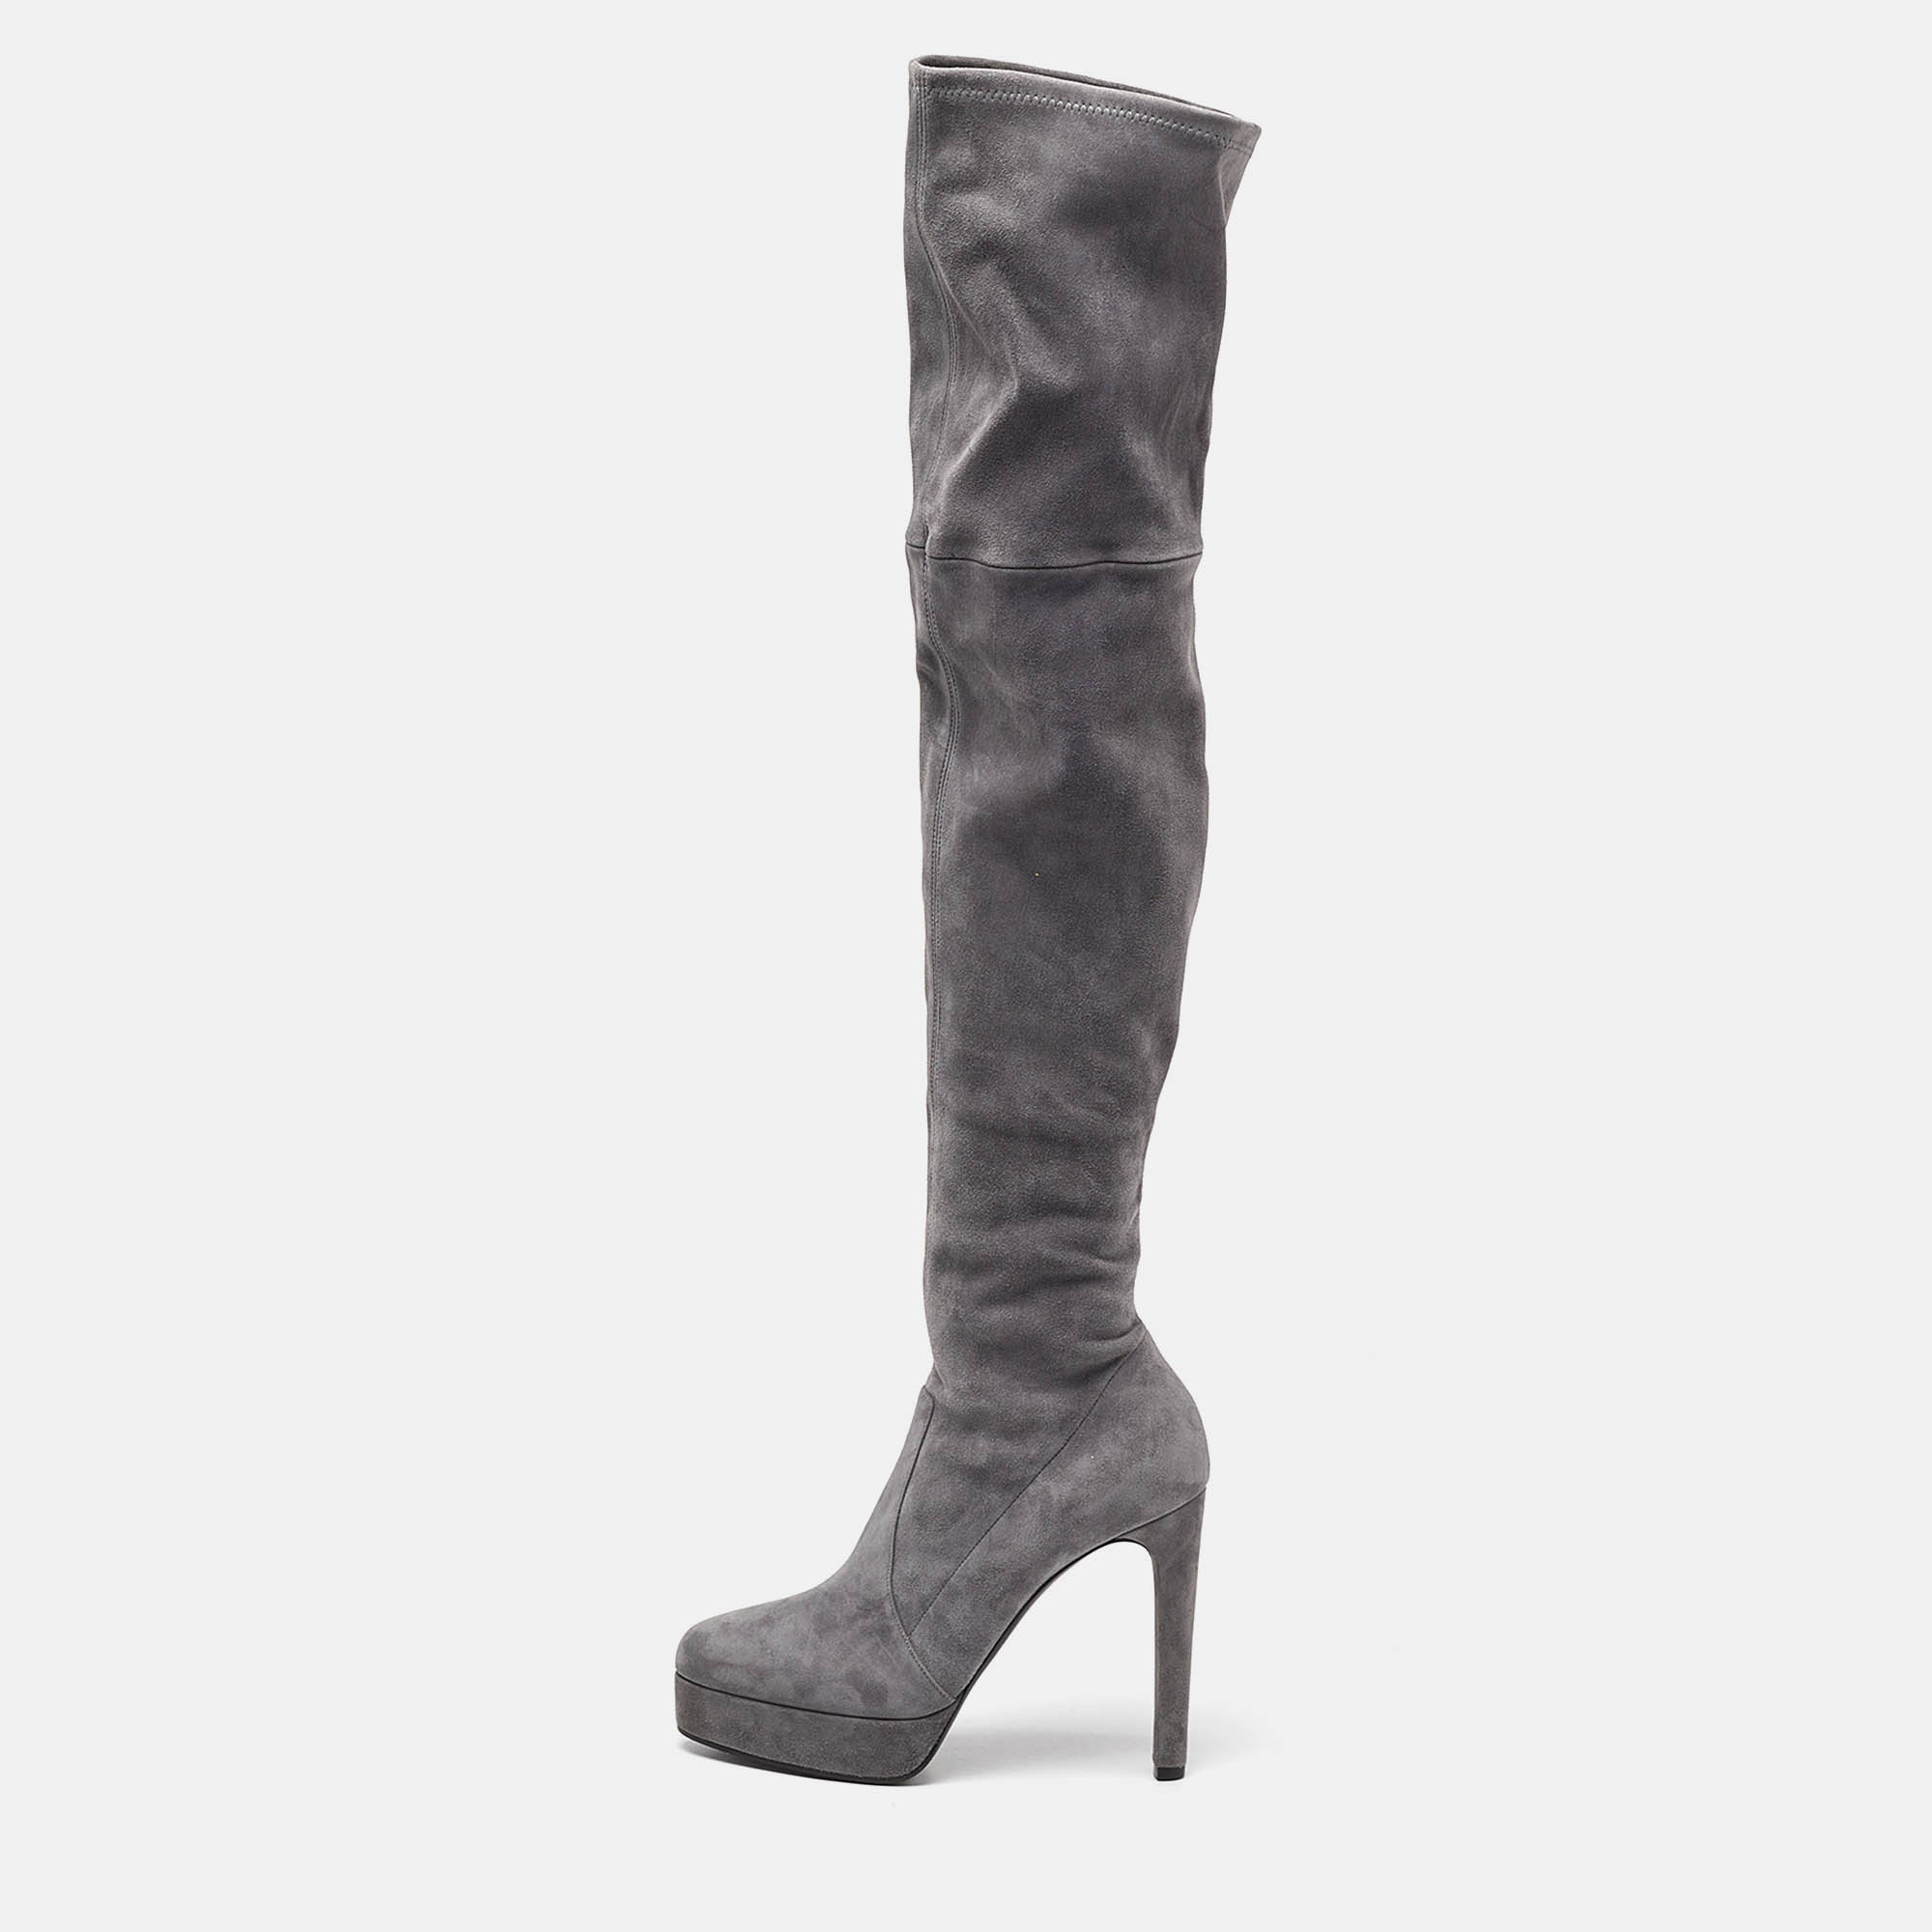 Casadei grey suede over the knee length boots size 40